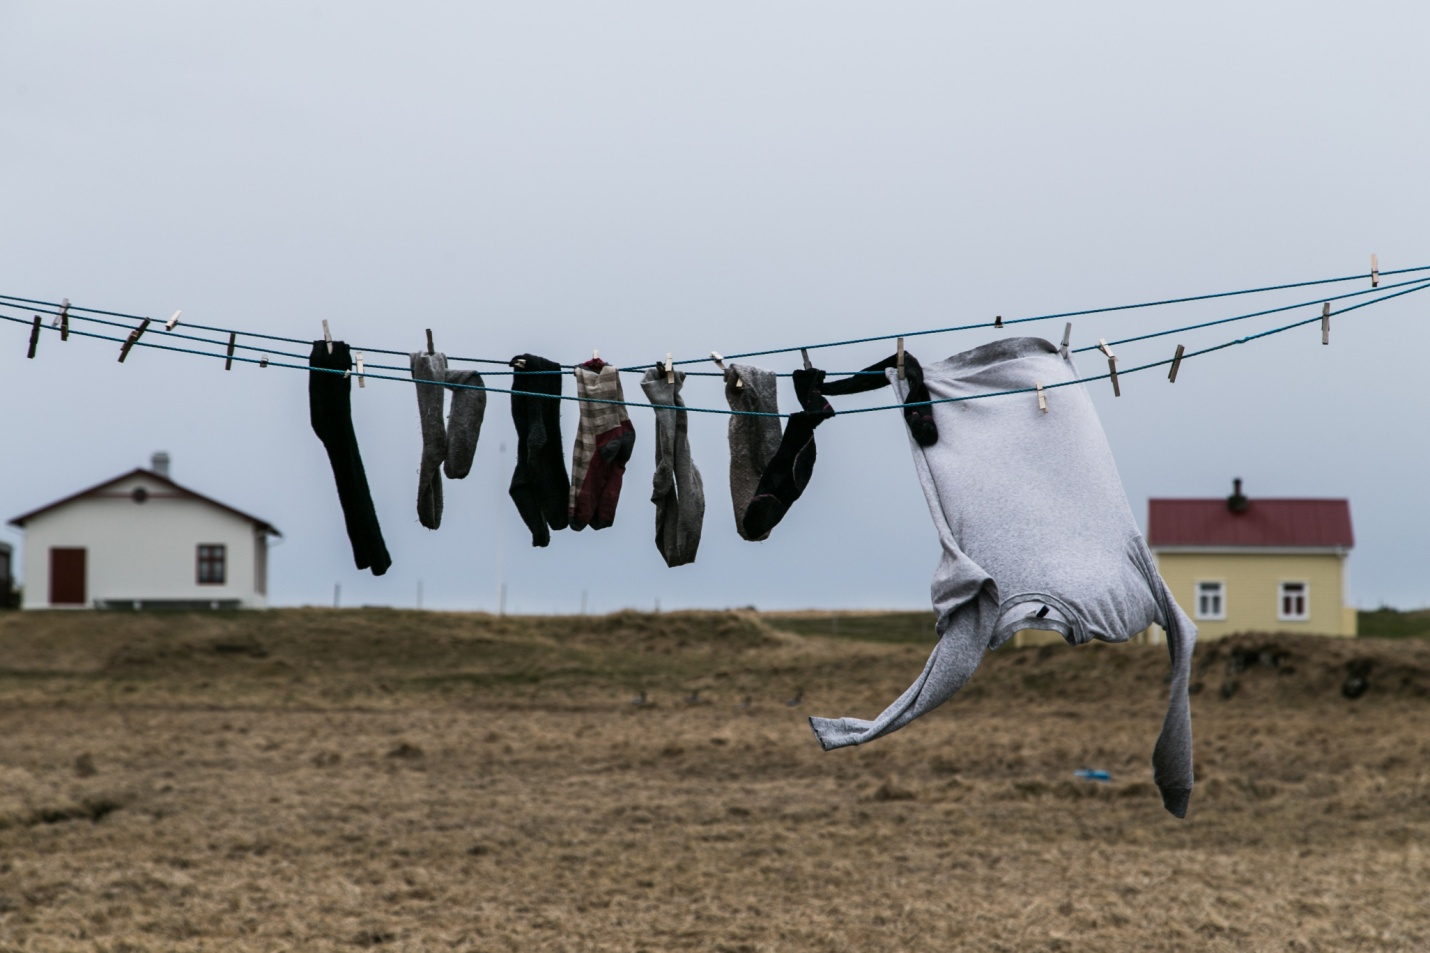 Socks and a jumper hanging on a wire for drying